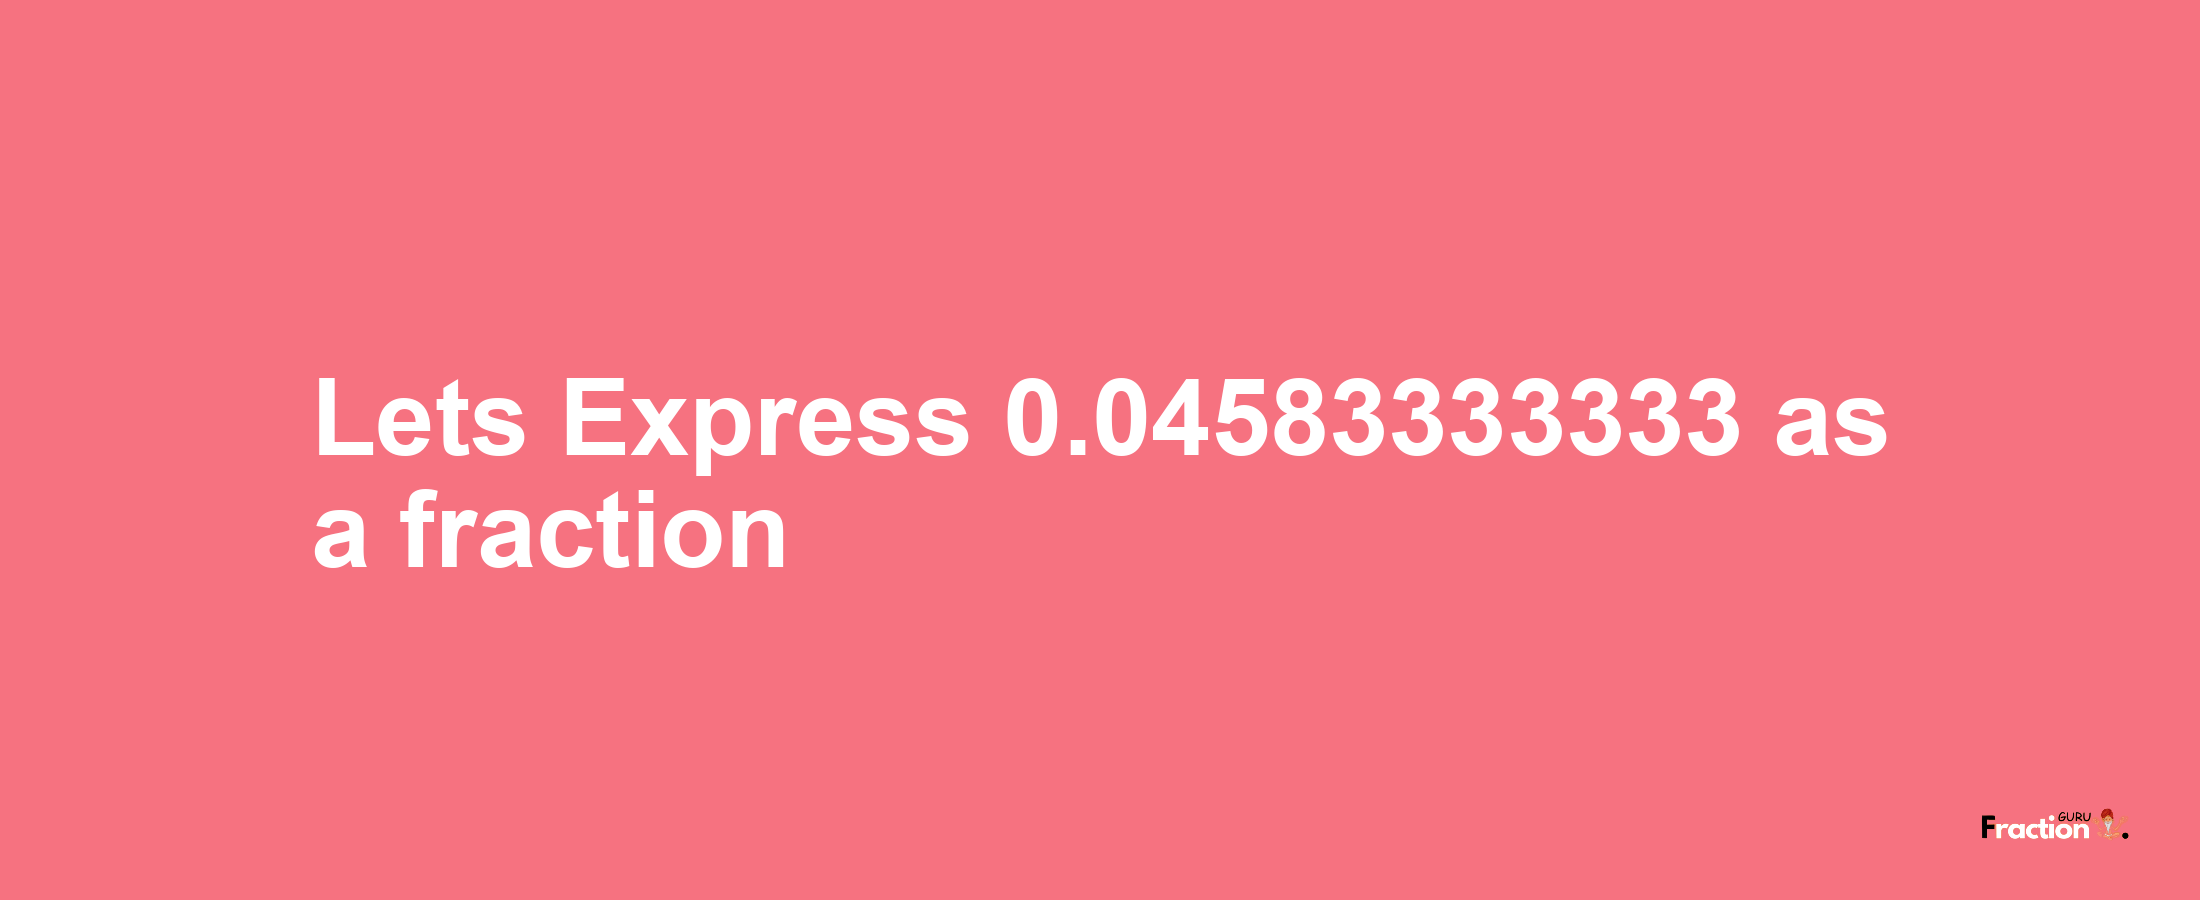 Lets Express 0.04583333333 as afraction